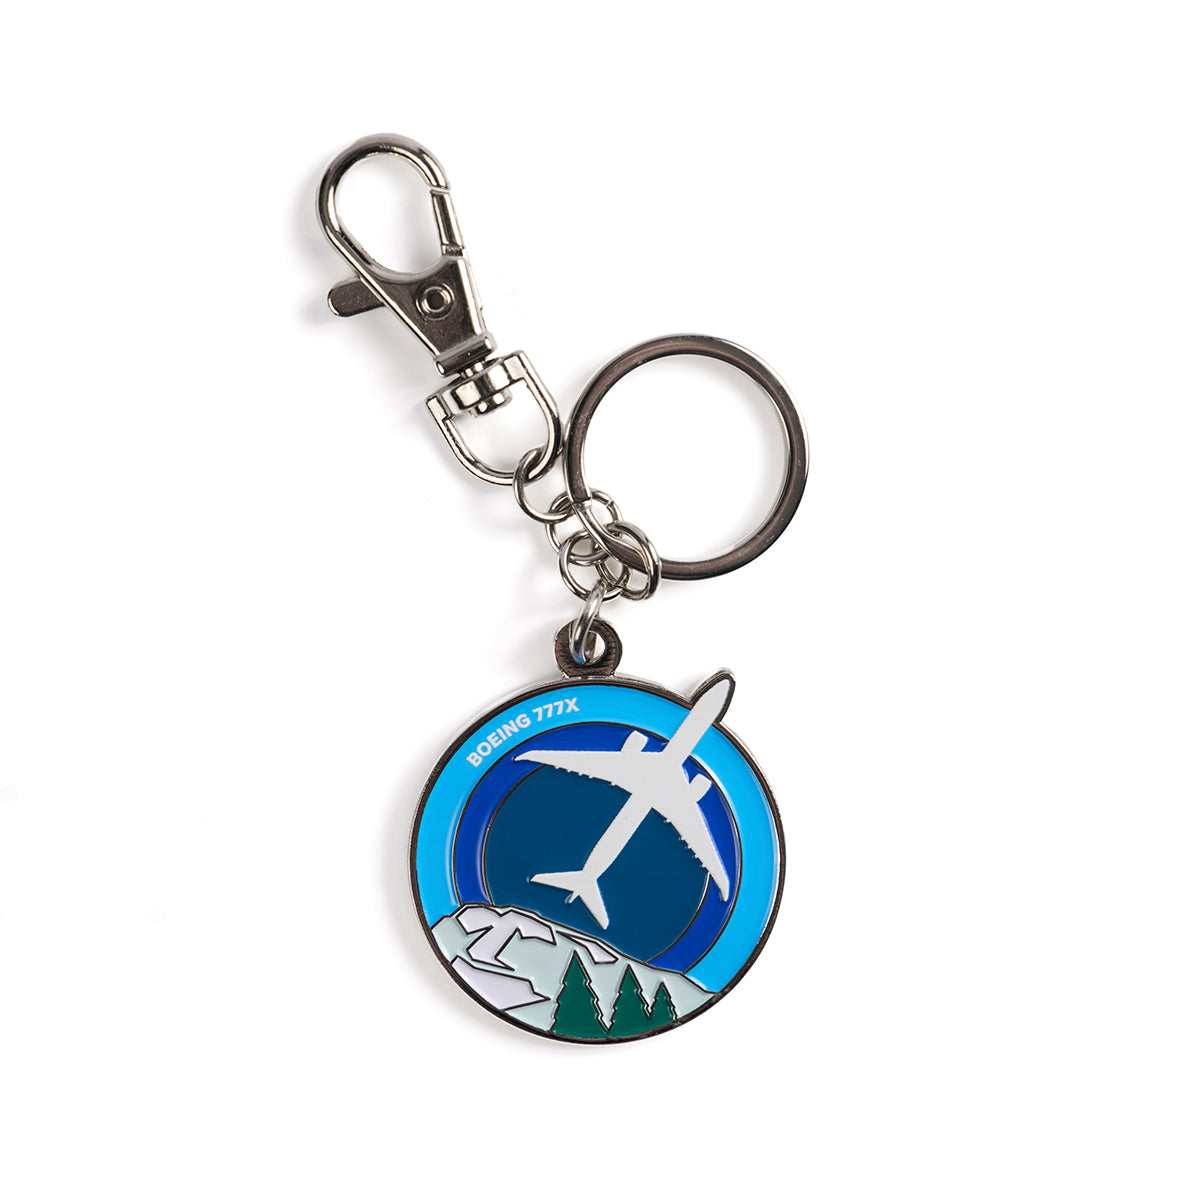 Skyward keychain, featuring the iconic Boeing 777X in a roundel design.